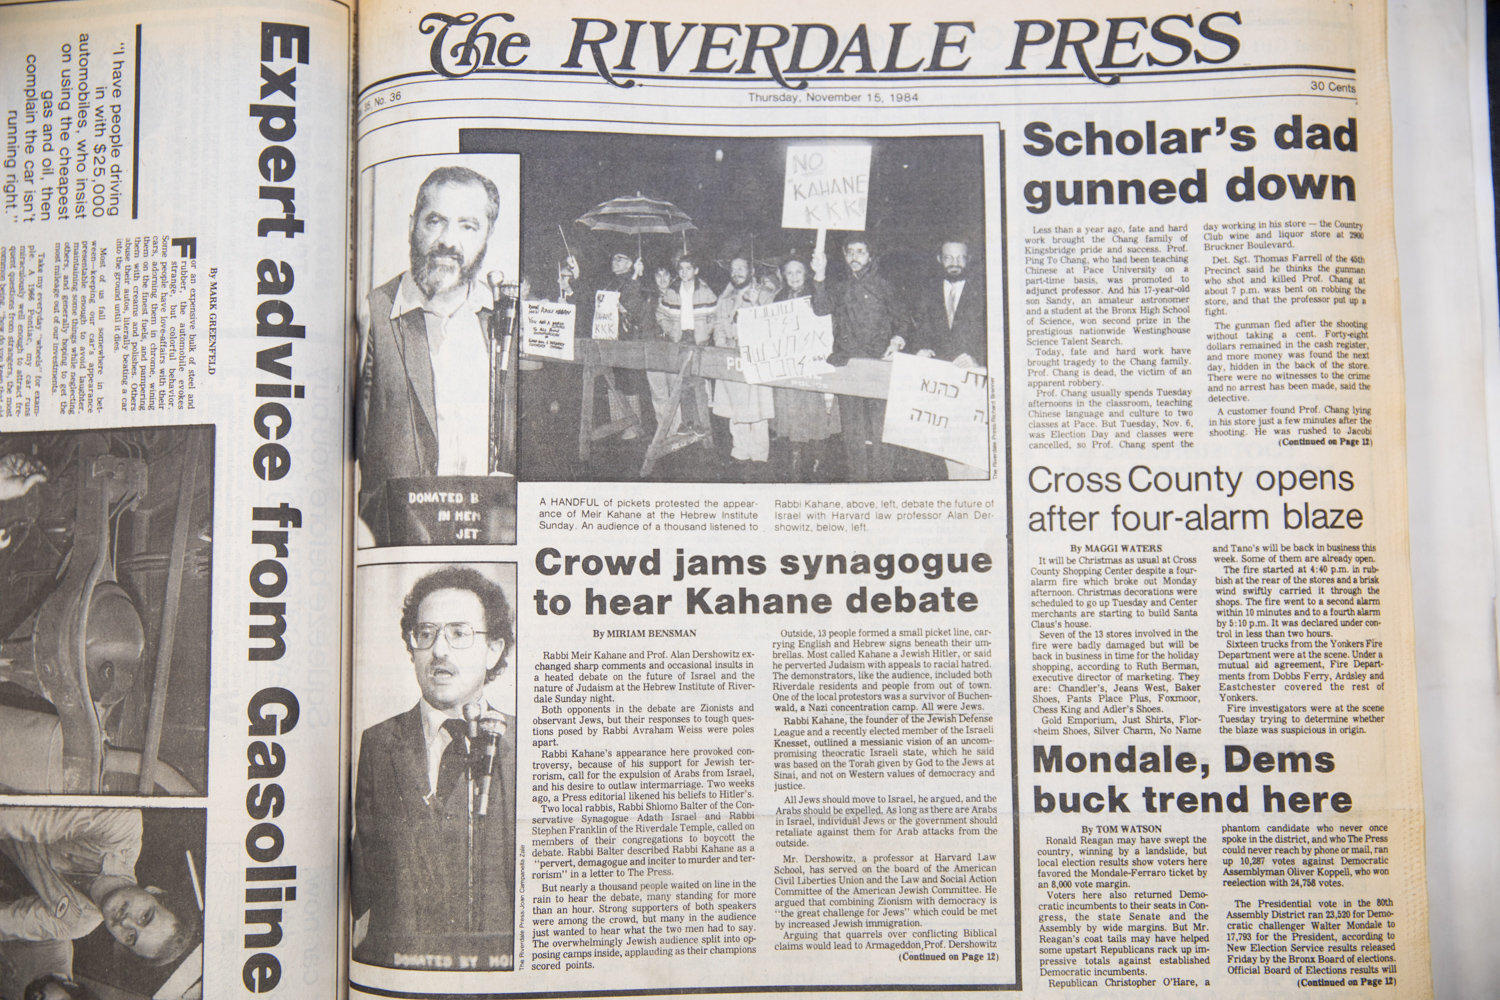 The March 1, 1984 edition of The Riverdale Press provided extensive coverage of the debate between then-Harvard Law School professor Alan Dershowitz and Rabbi Meir Kahane. While both were observant Jews and Zionists, they had sharply different opinions on the future of Israel.